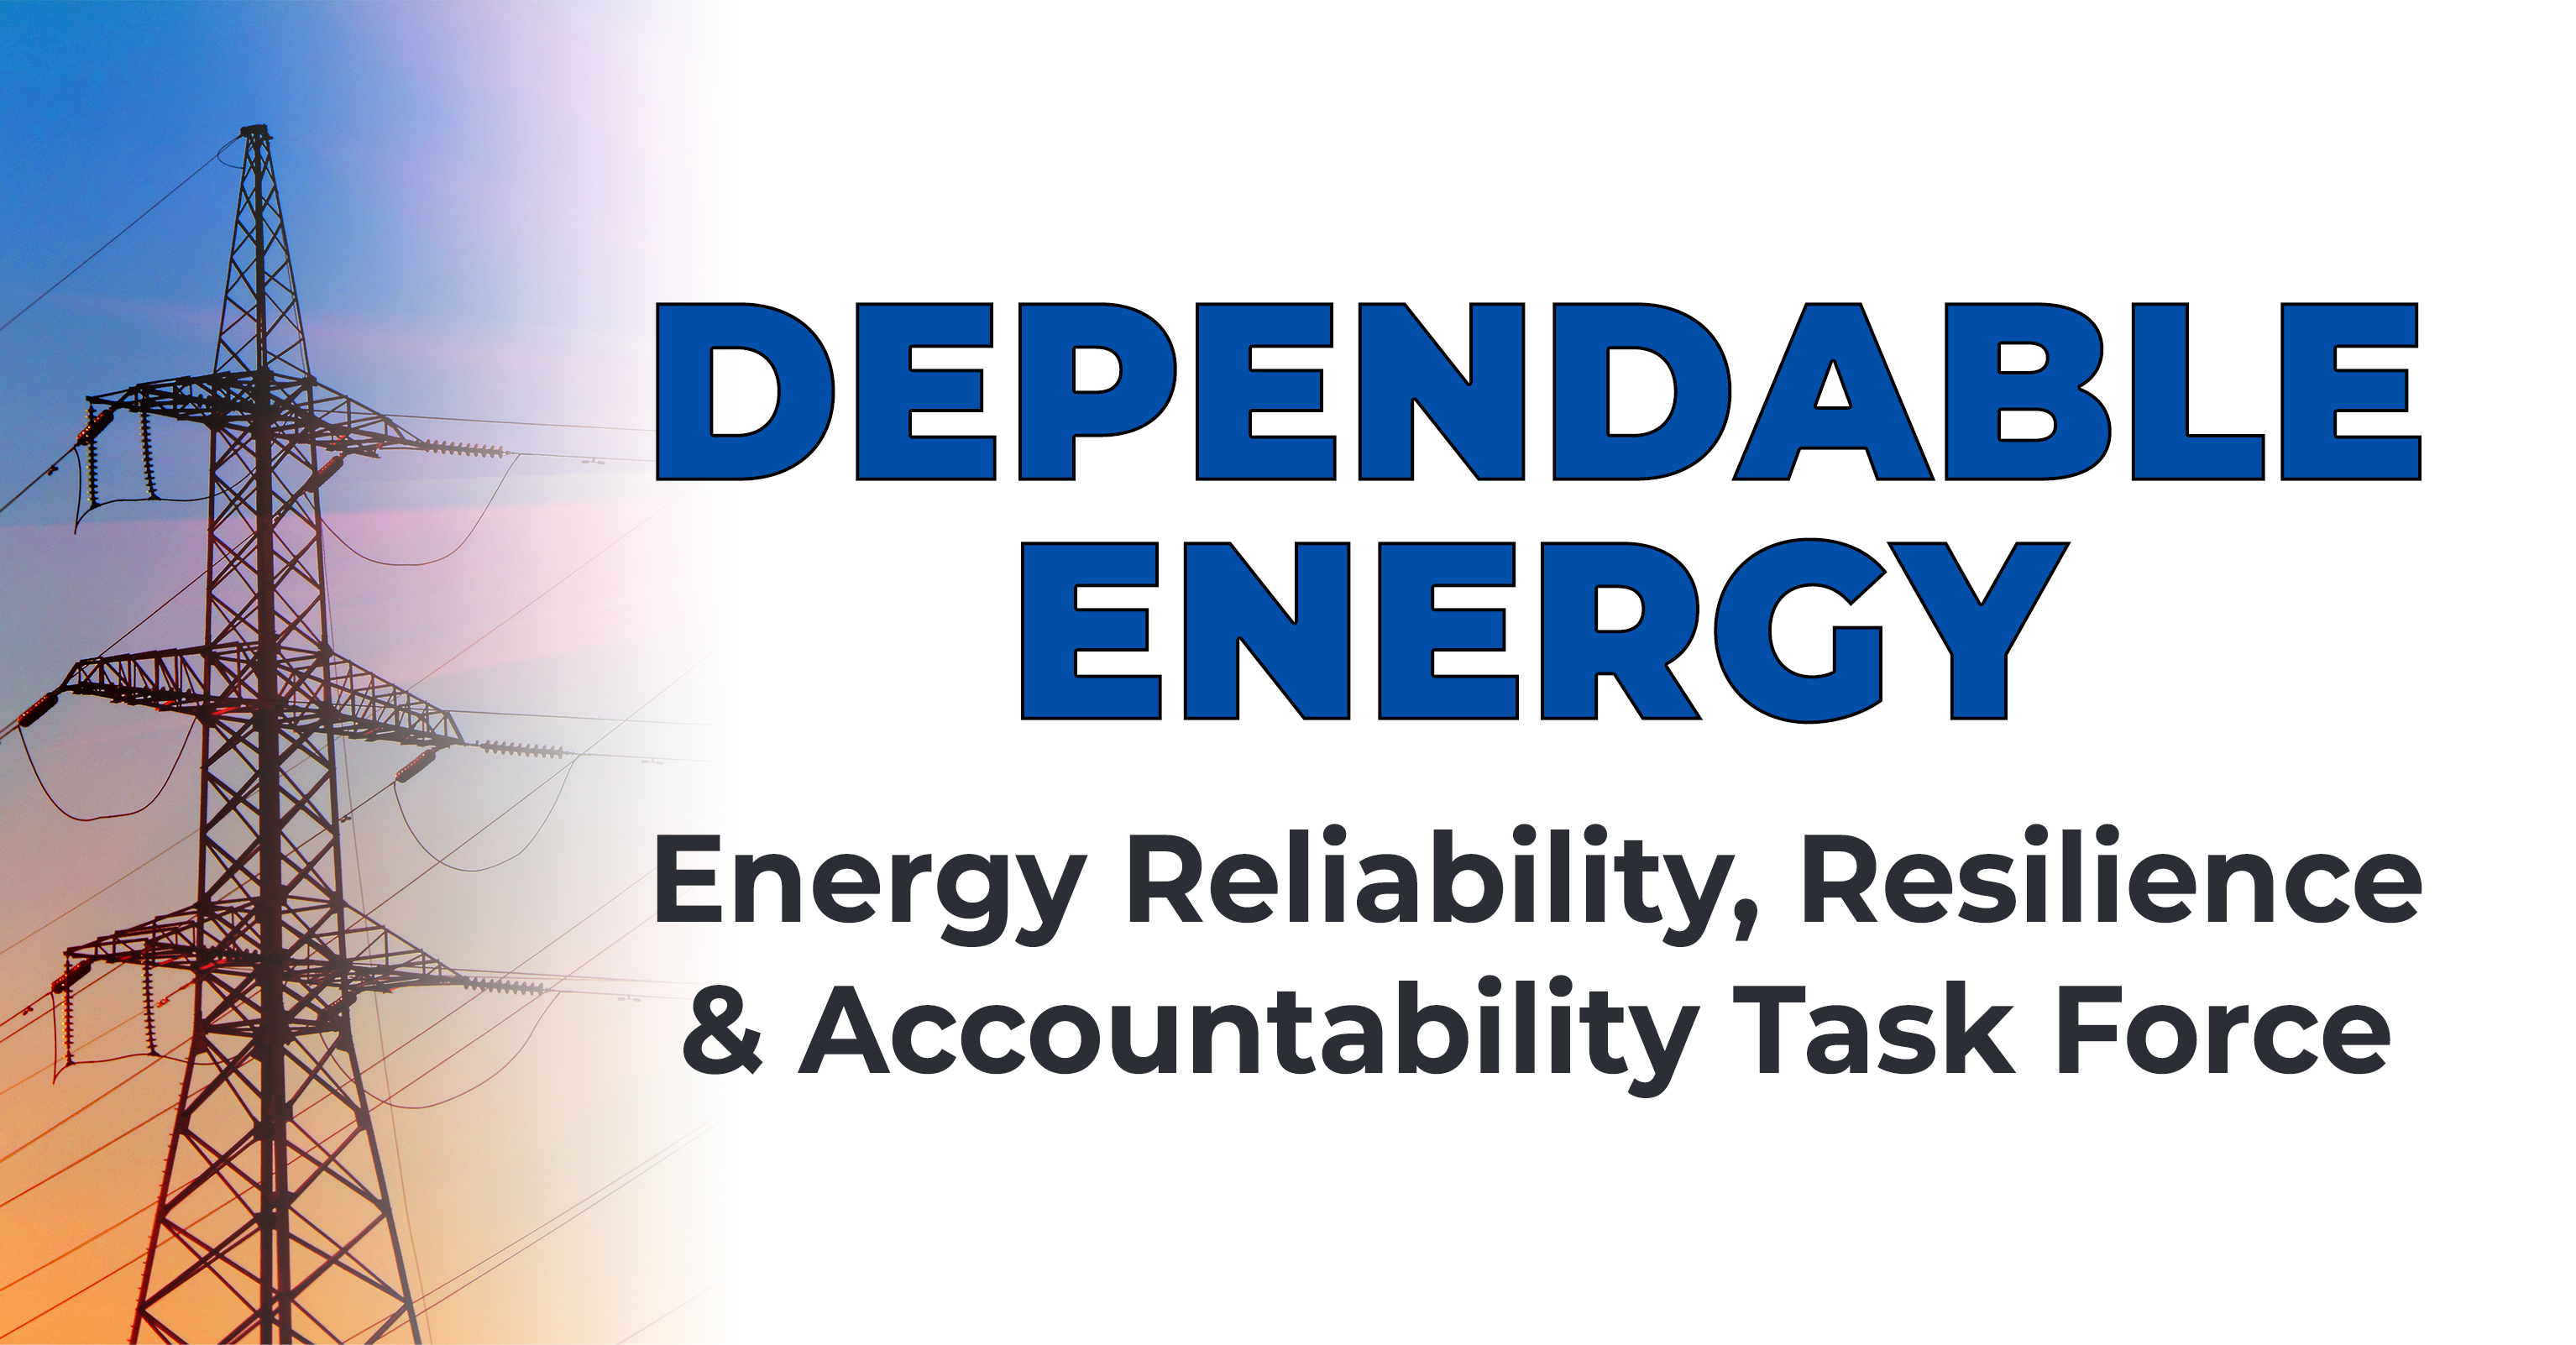 Graphic with a photo of a power transition structure at sunset at left. Text at right reads, “Dependable Energy. Energy Reliability, Resilience & Accountability Task Force.”